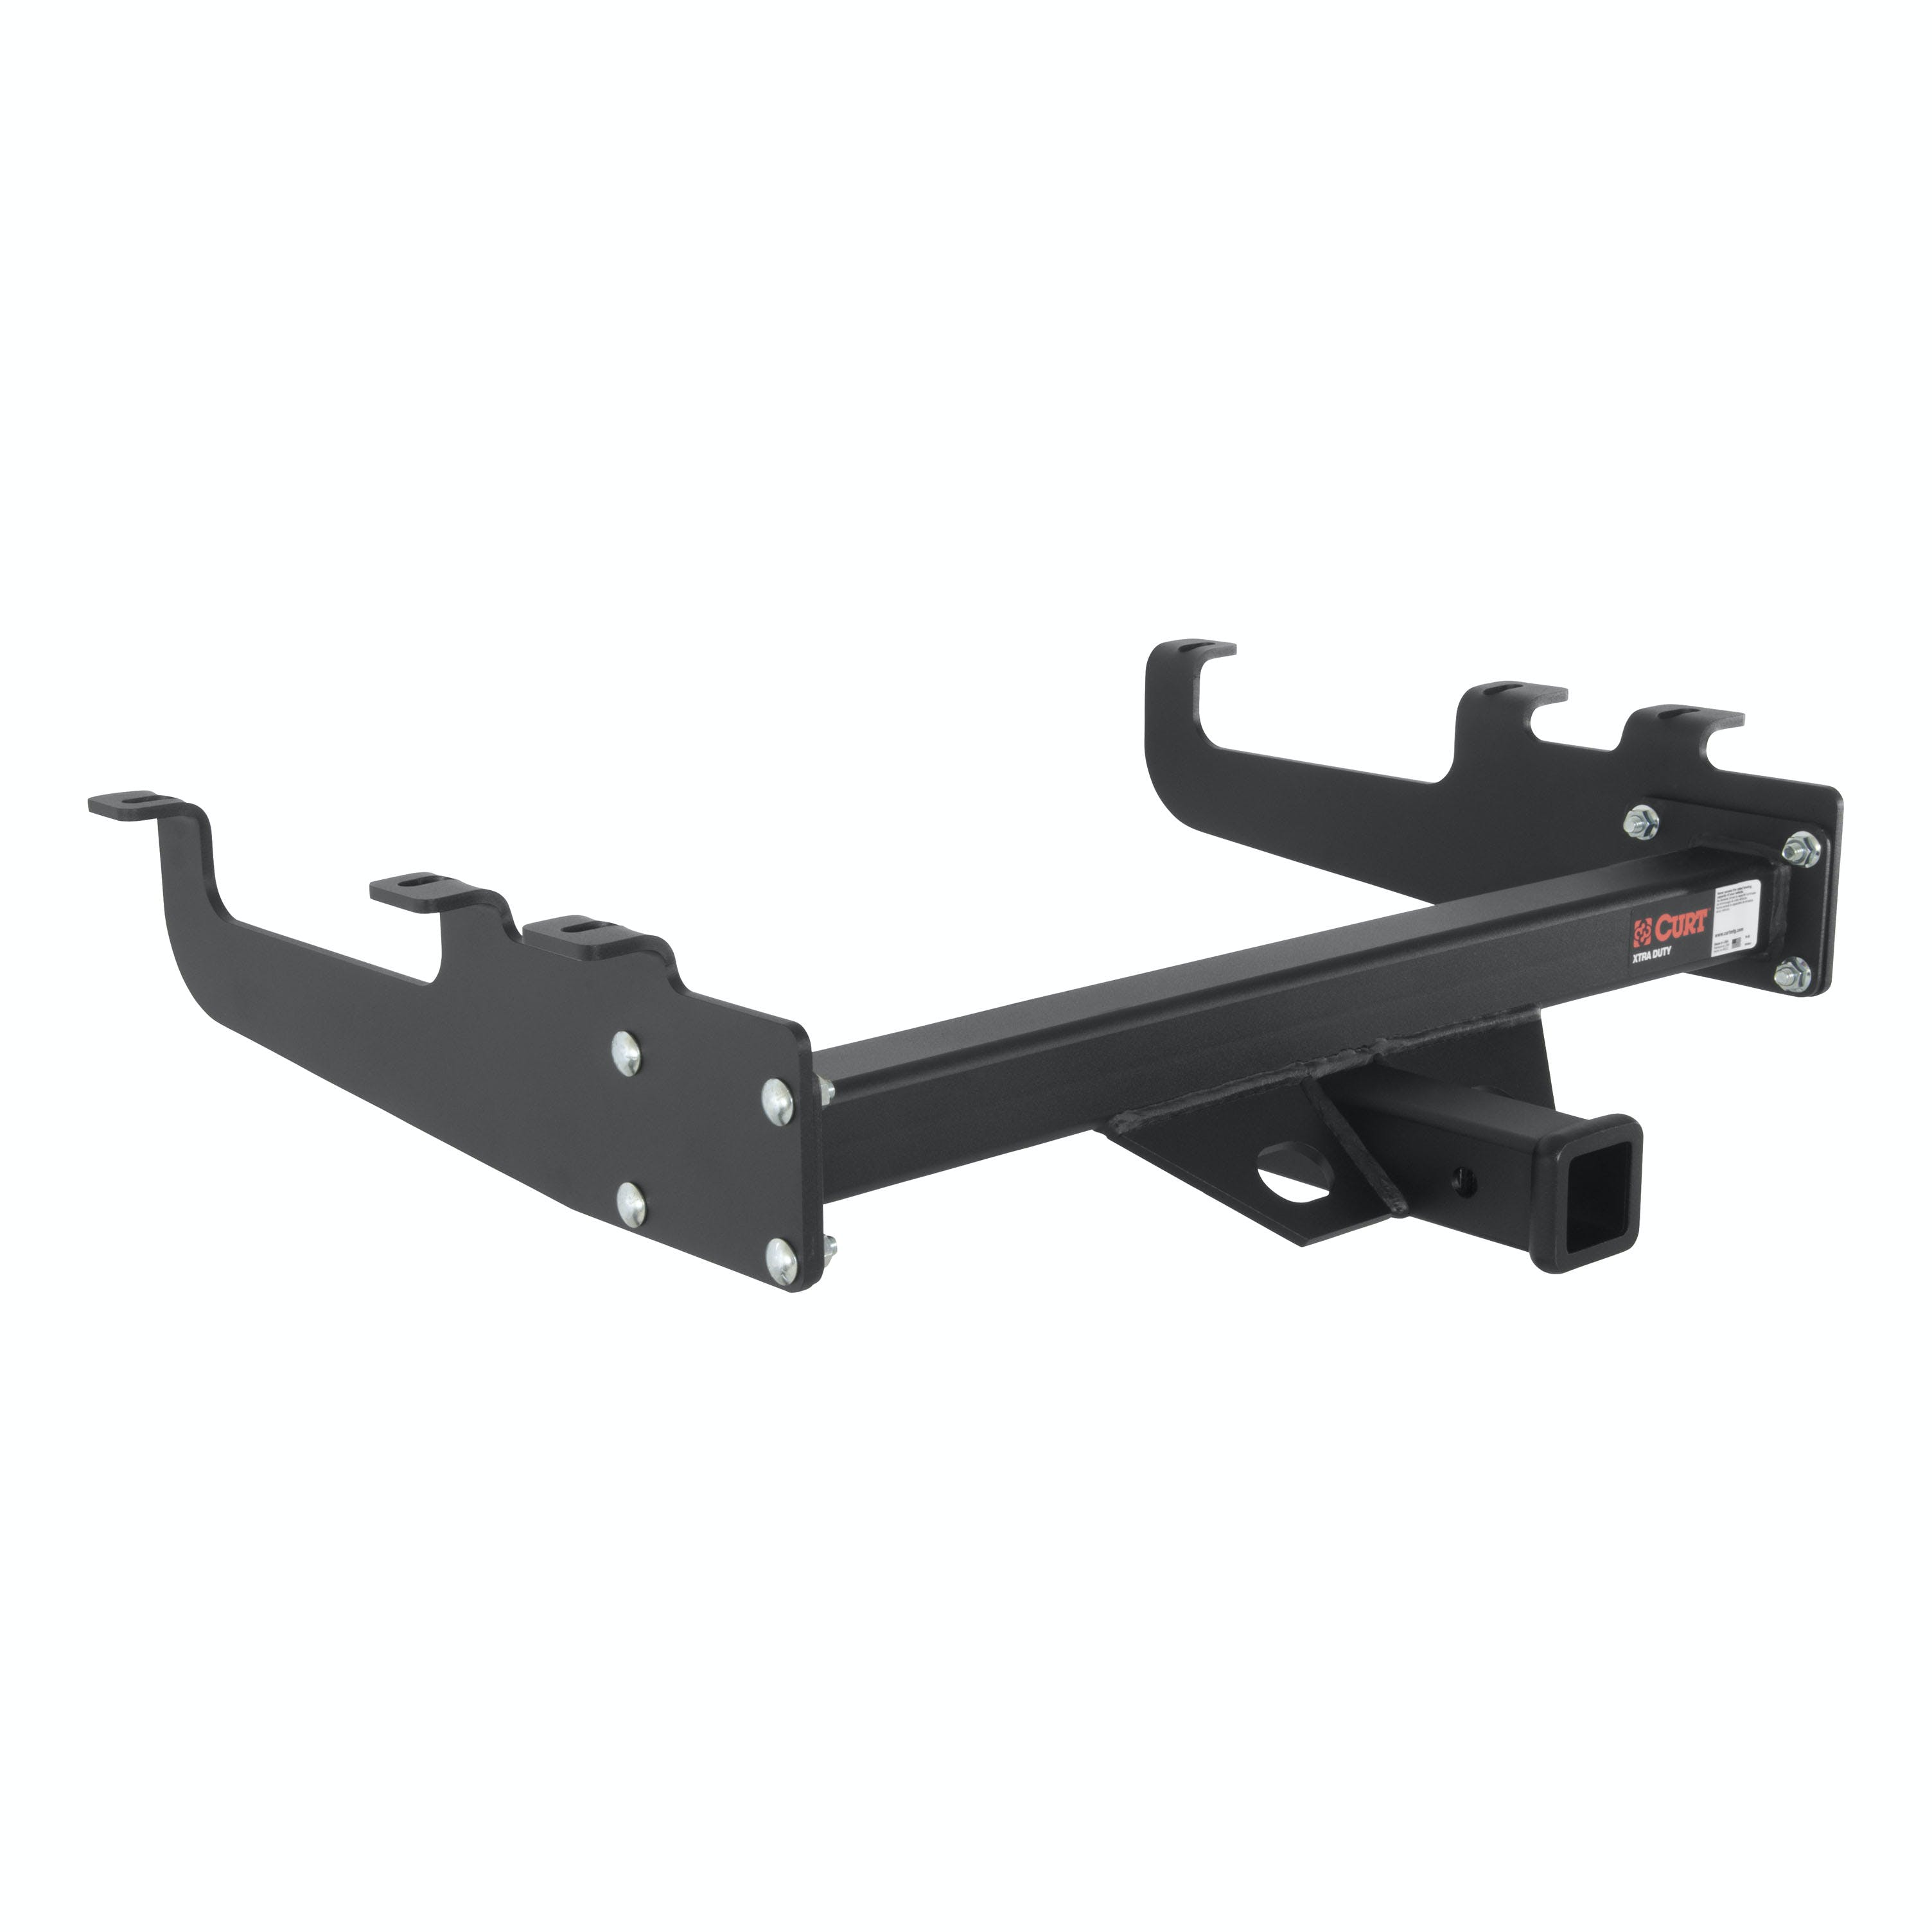 CURT 15510 Class 5 Multi-Fit Trailer Hitch with 2 Receiver